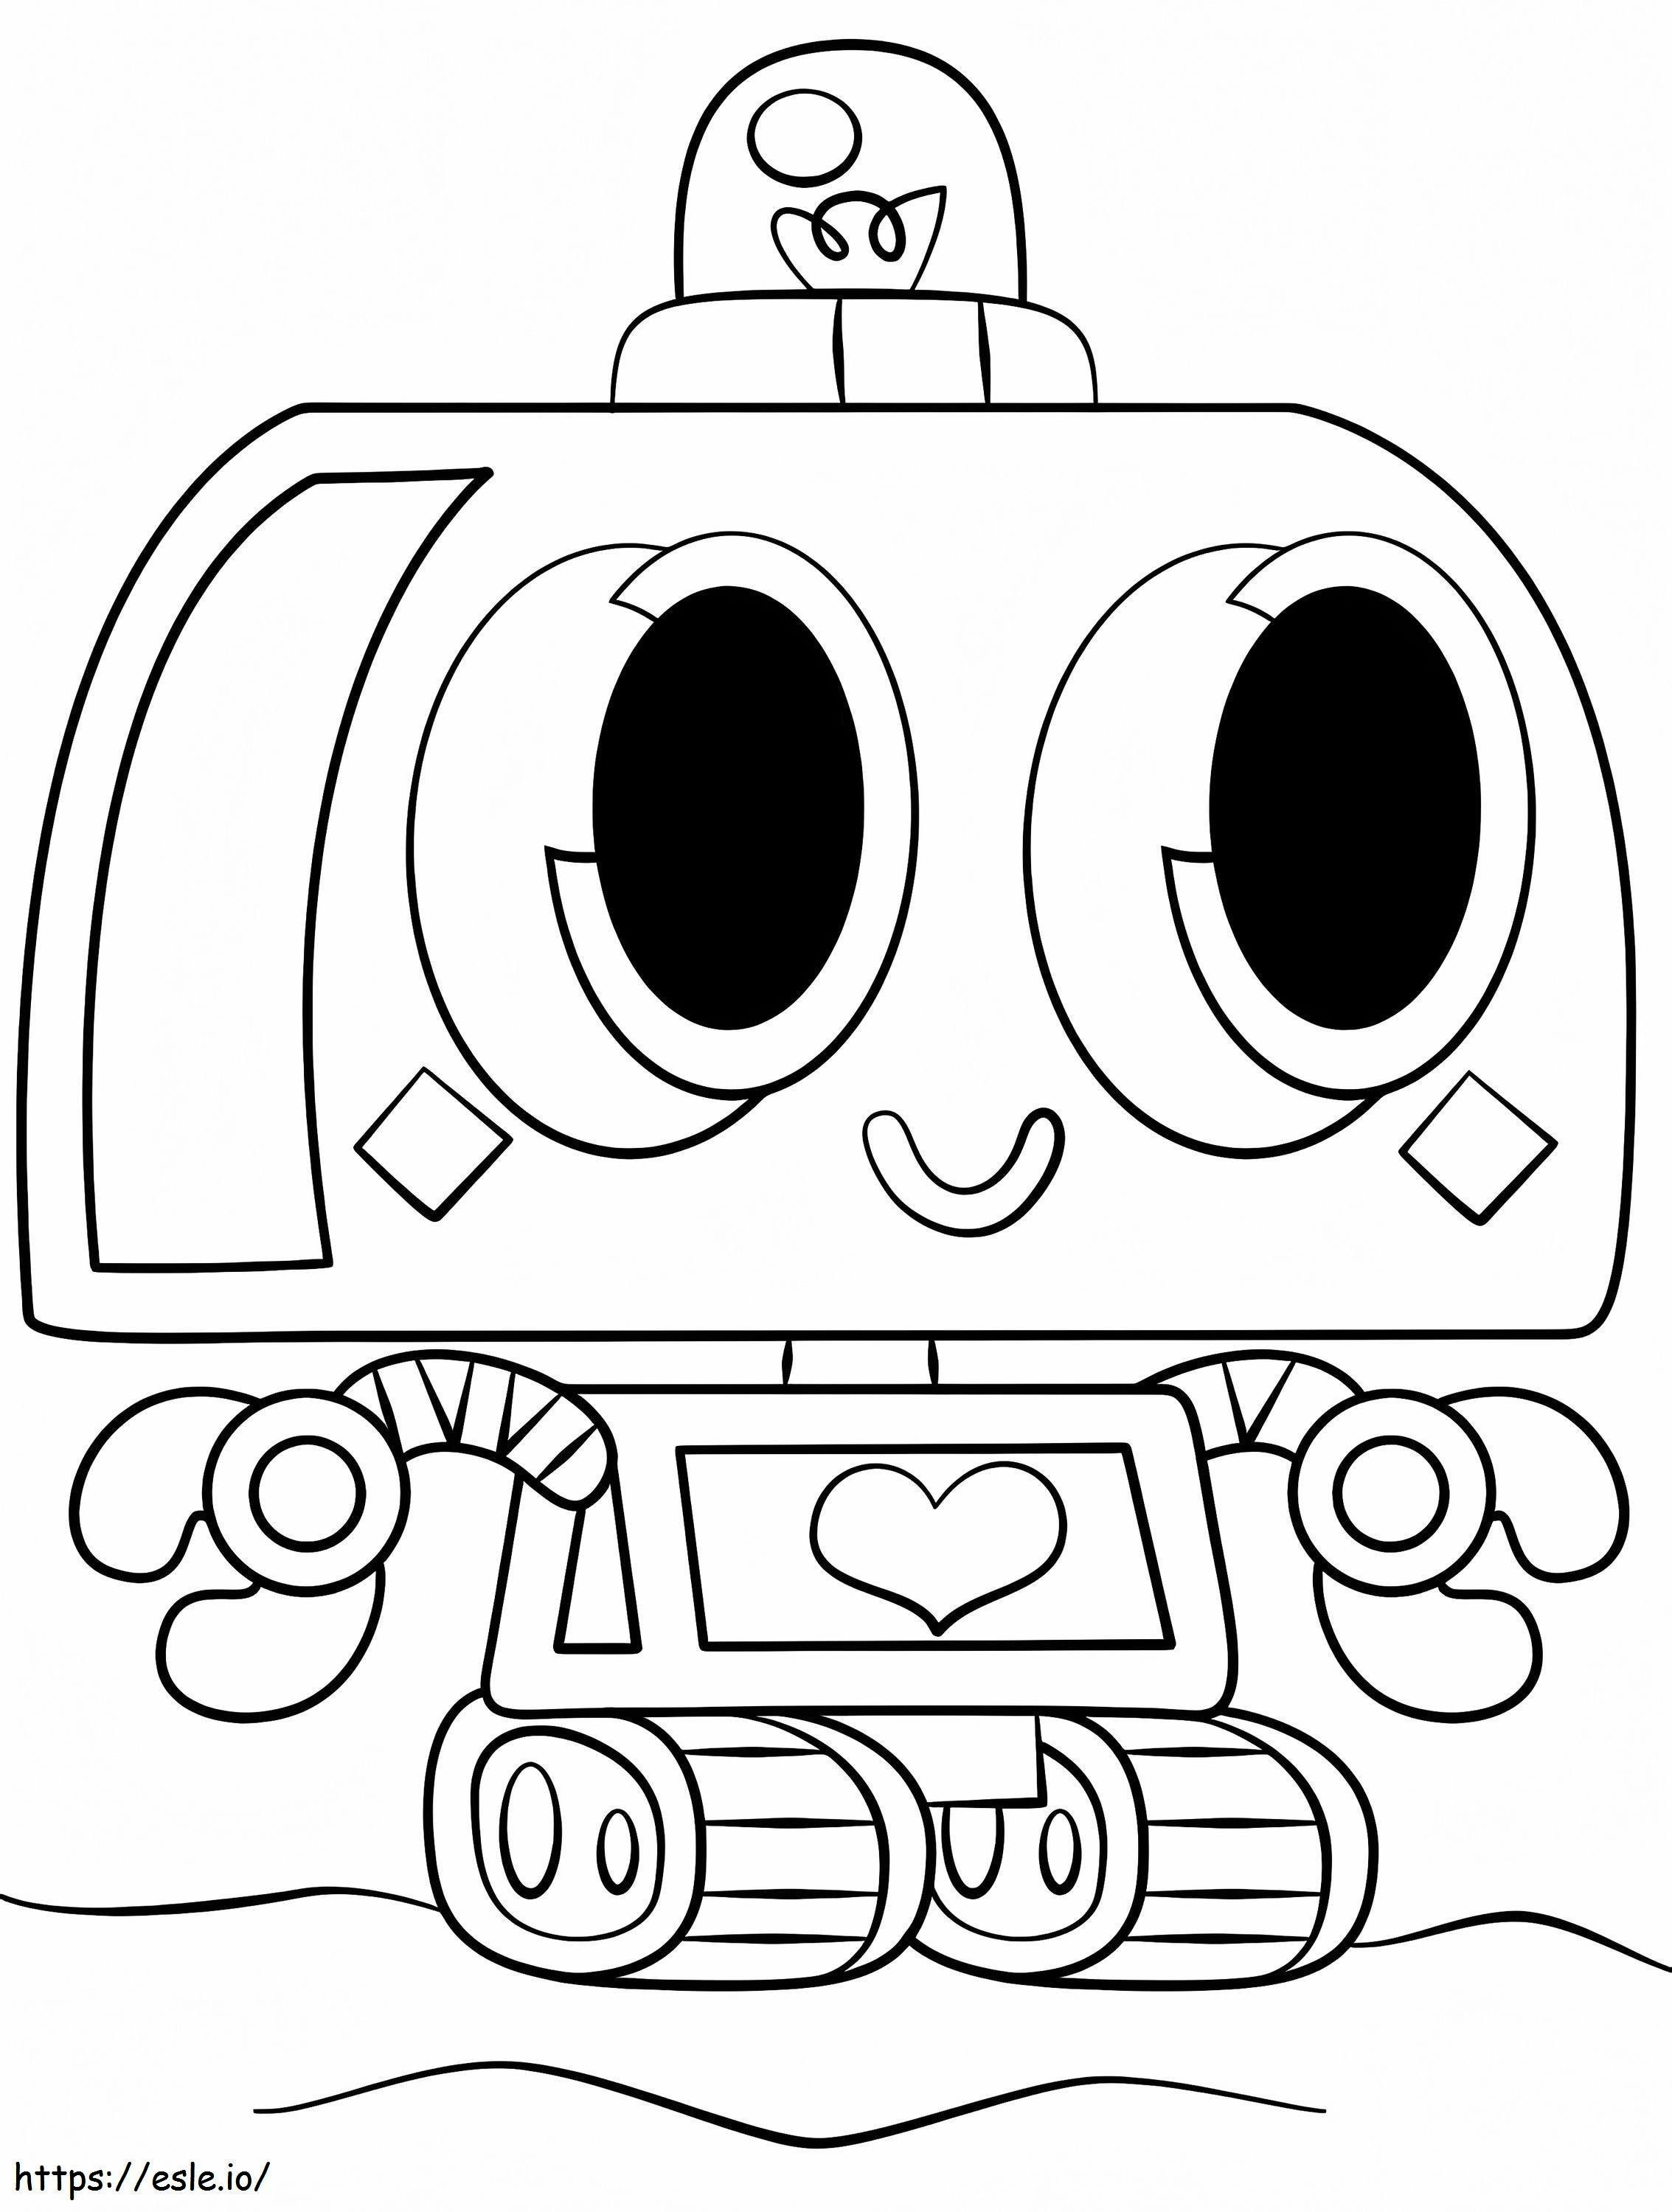 Moshi Monsters Nipper coloring page